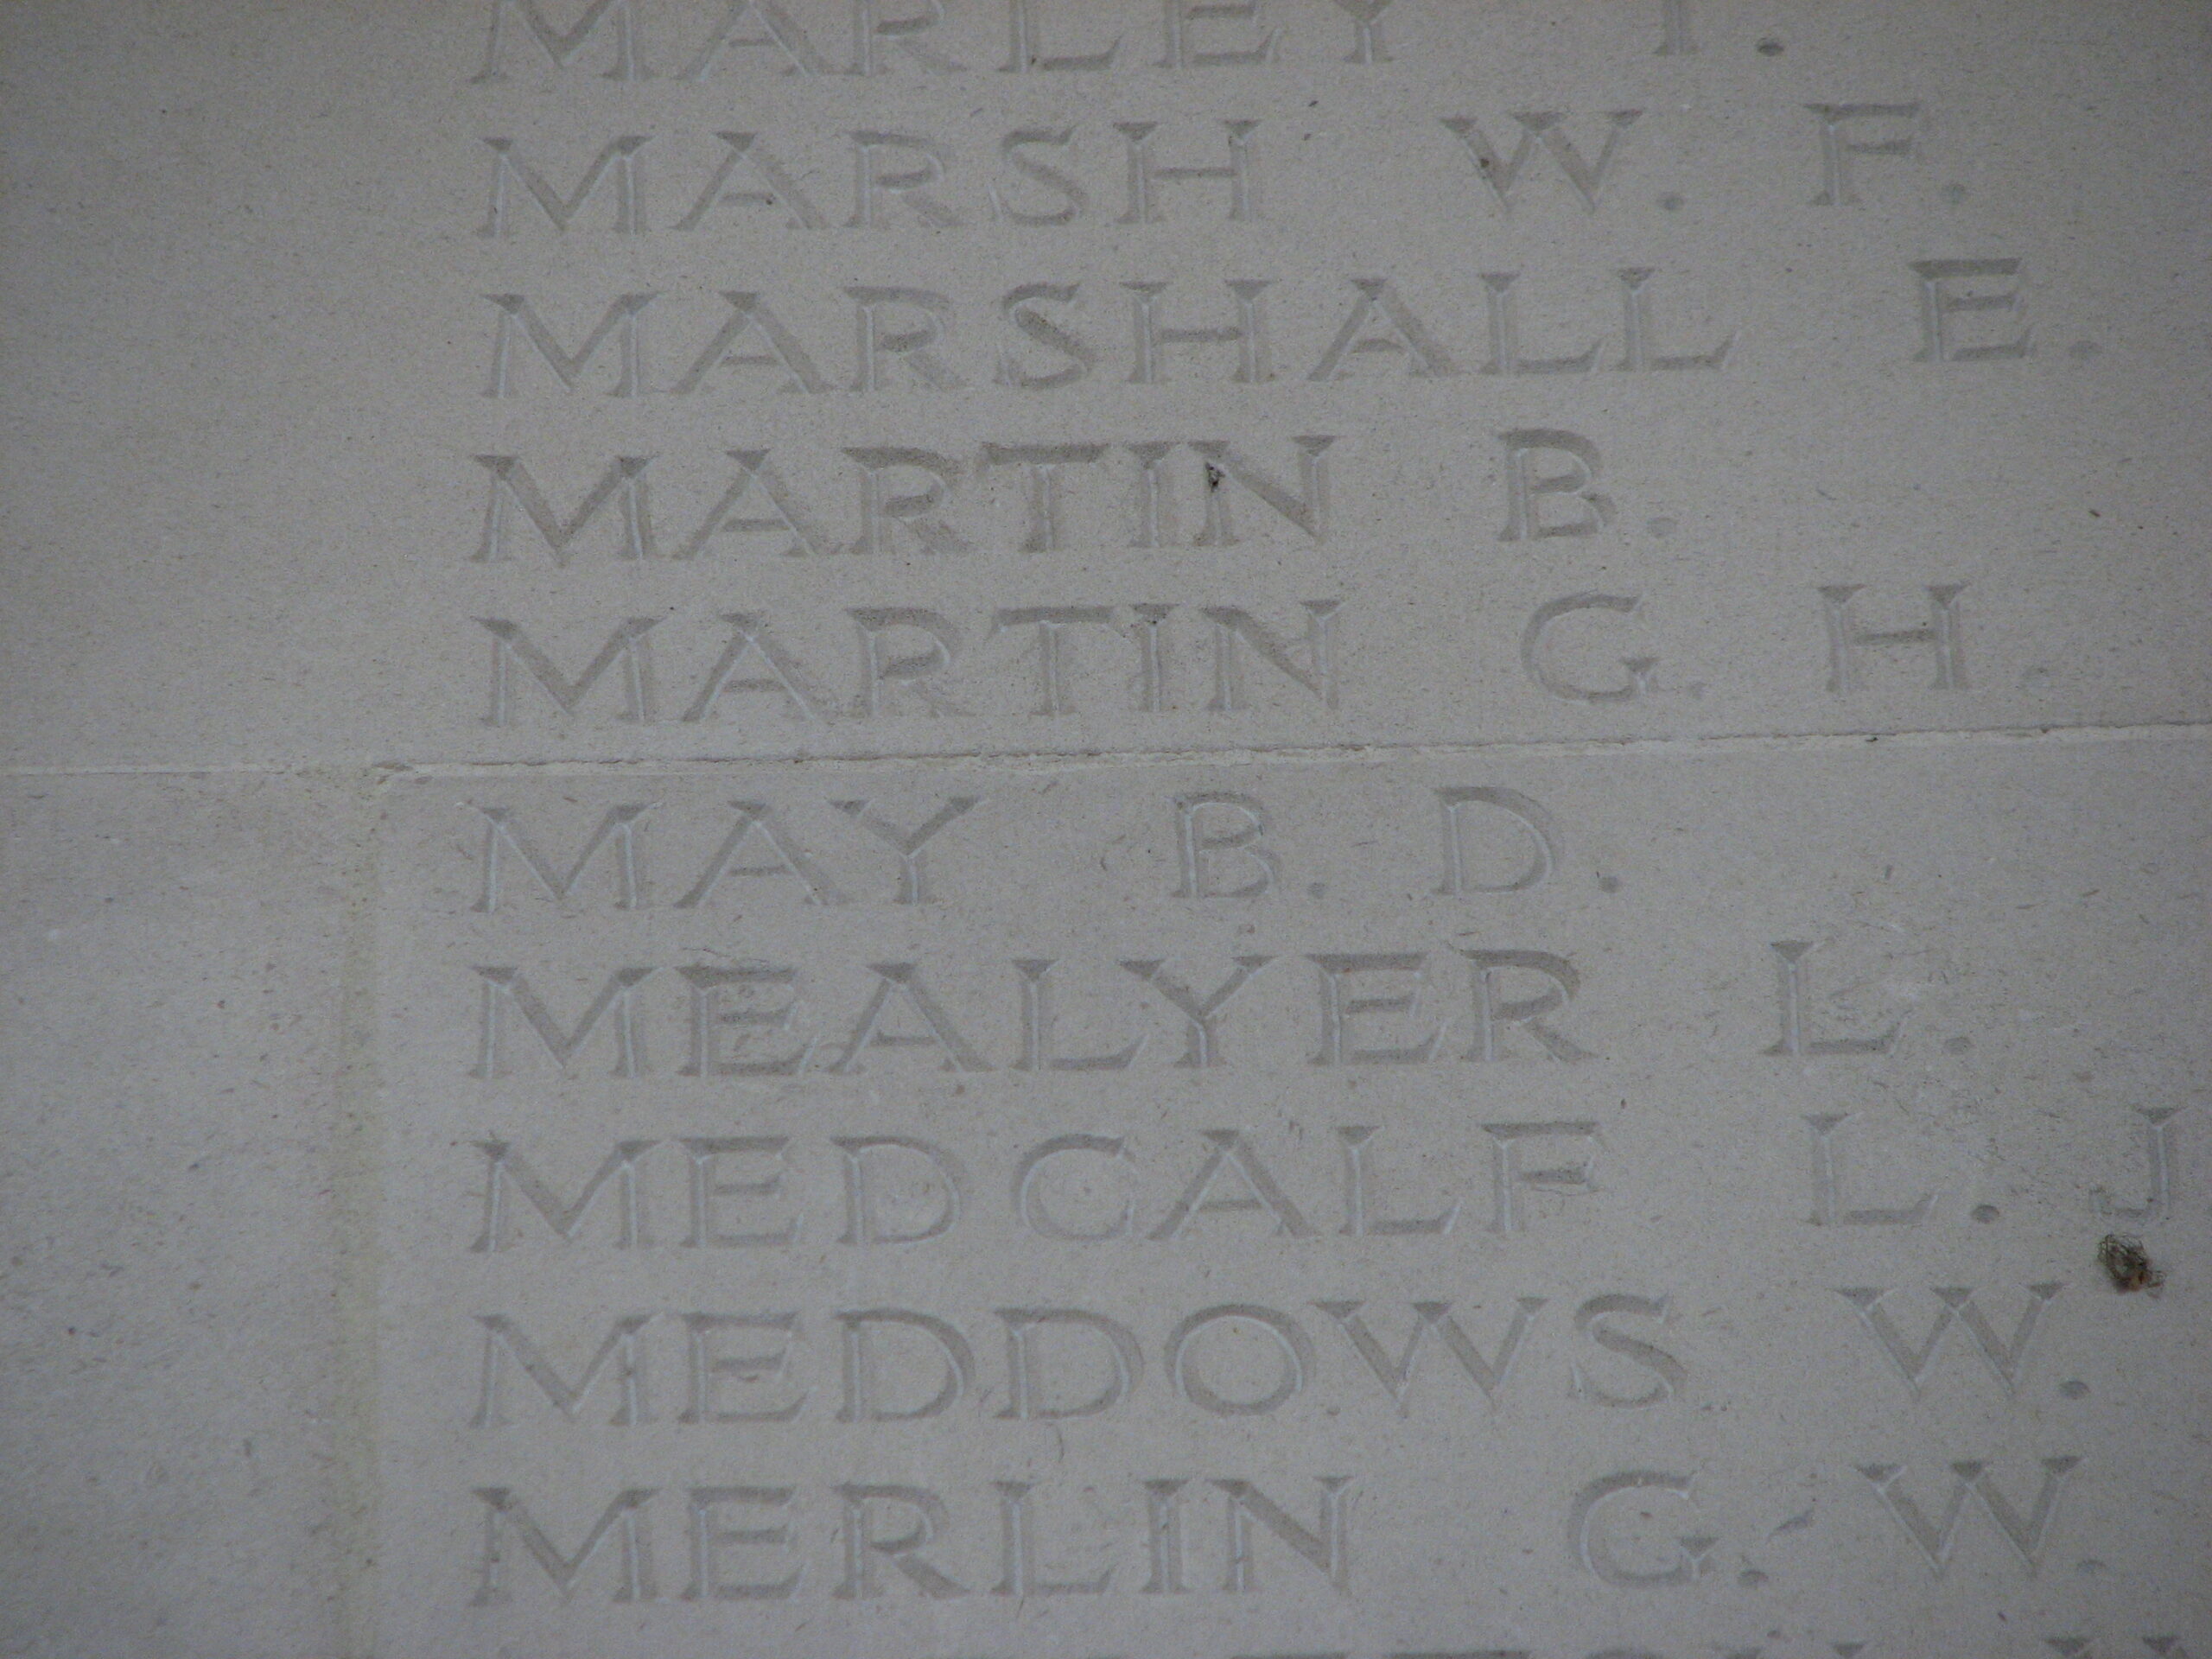 Bertie's name inscribed on the Arras Memorial<br>MA